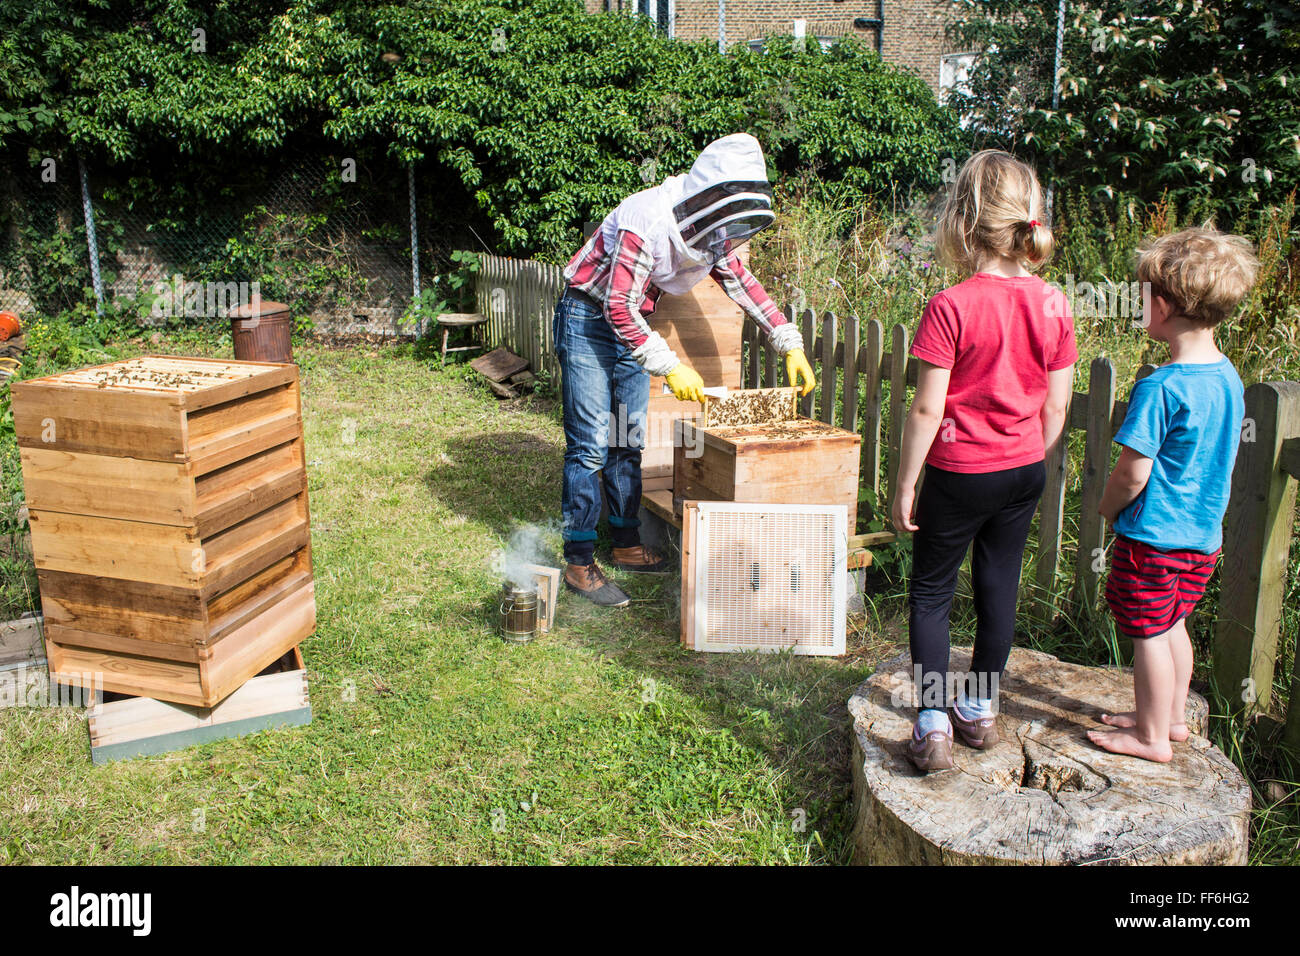 Children watching the bee keeper inspect the honey frames of the bee hives. Urban bee keeping, community garden project, George Downing Estate, Hackney, East London. Stock Photo